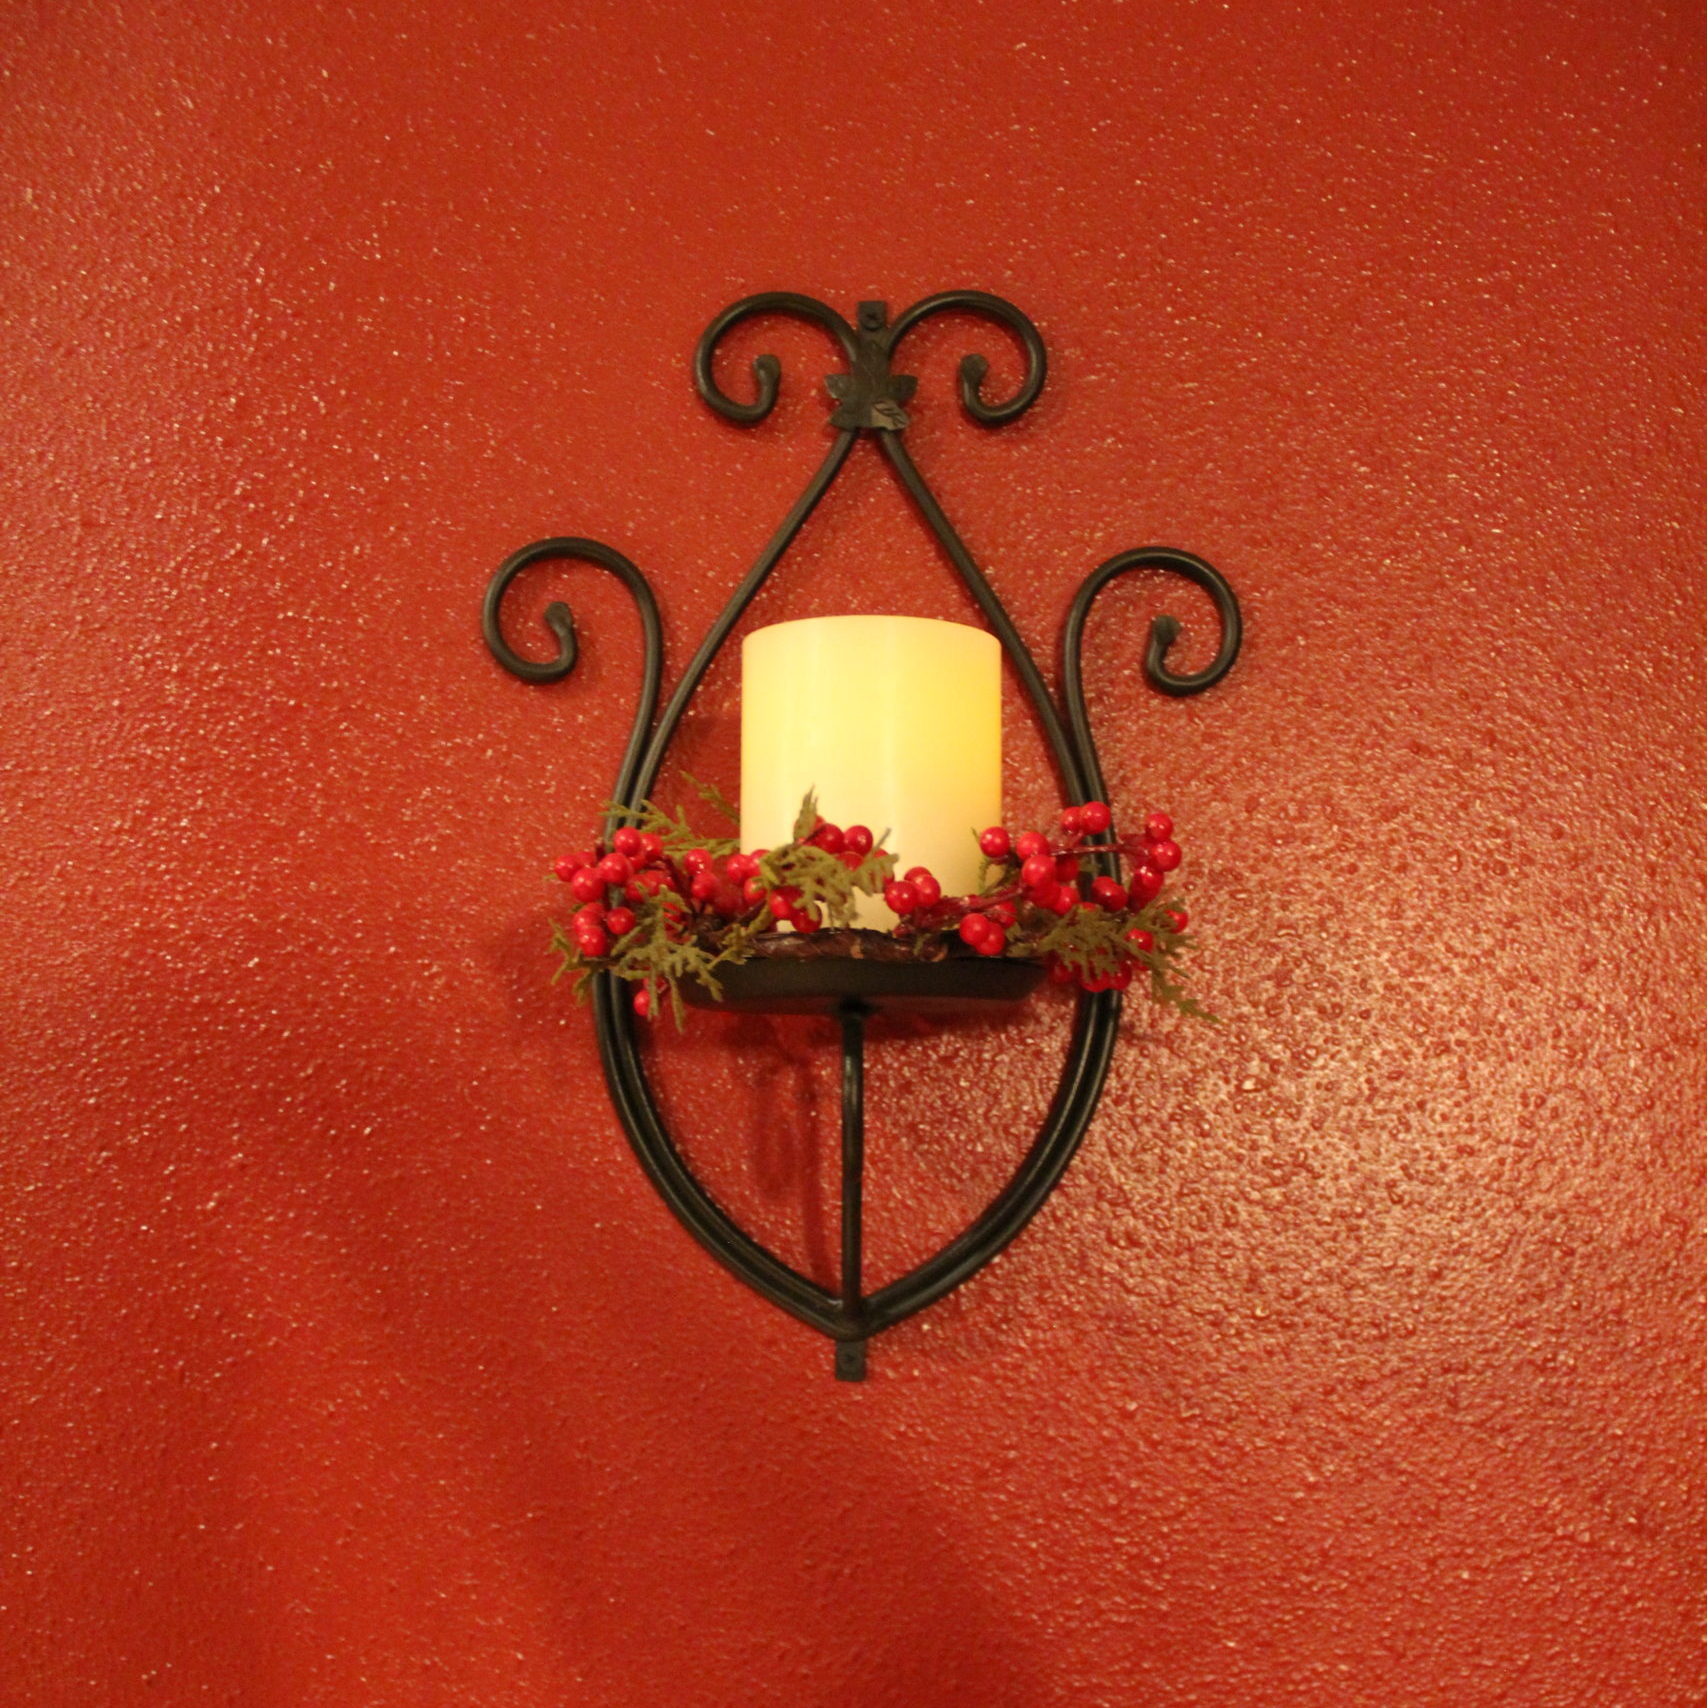 Wall sconces on the Waite wall get a pretty candle ring of Christmas greenery. Sconce is Longaberger with an automatic candle.